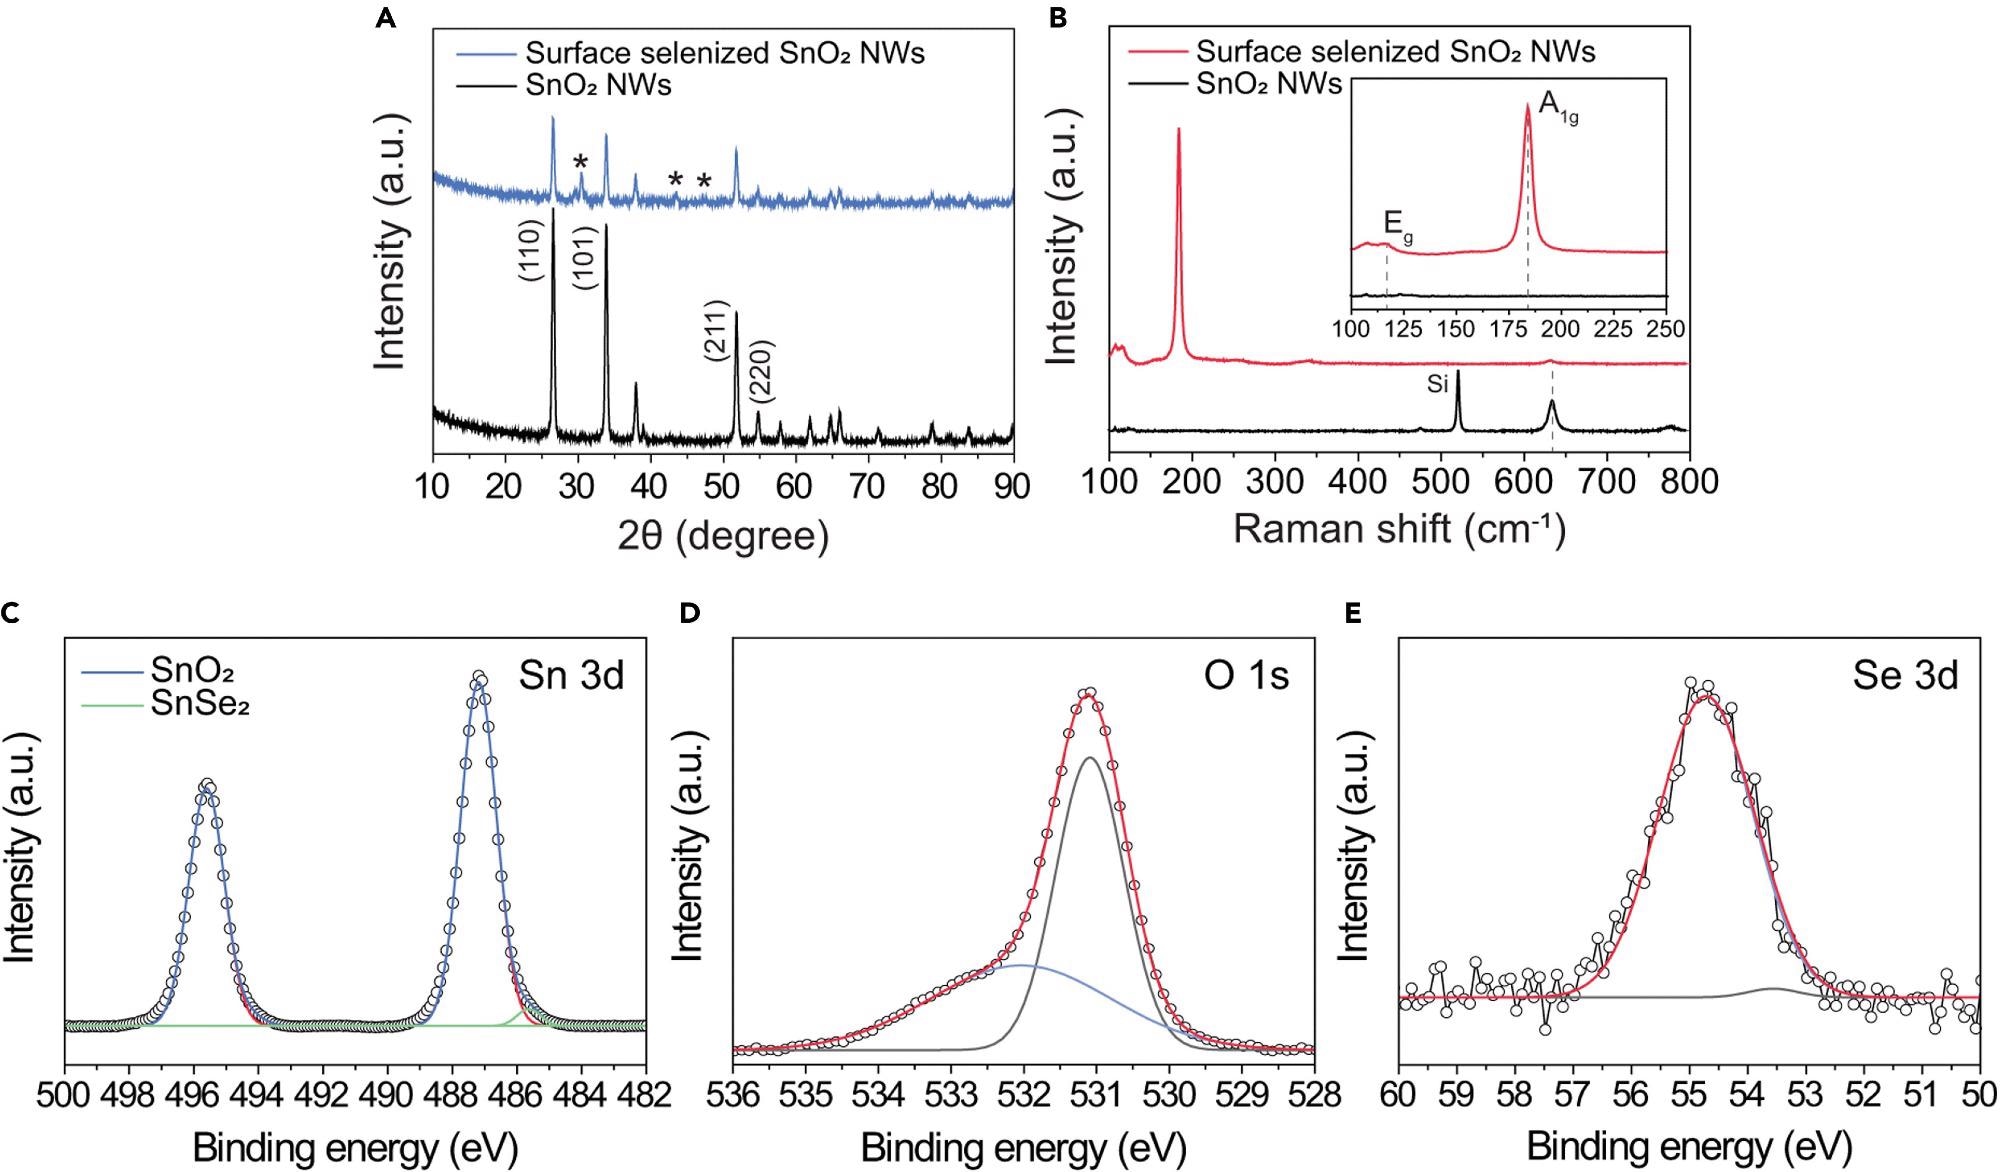 Structural and chemical characterizations of 1D SnO2–2D SnSe2 hybrid nanowire network (A) XRD spectra of pristine SnO2 nanowire (top) and SnO2 nanowires with ultrathin SnSe2 (bottom). (B) Raman spectra of SnO2 nanowires before (top) and after (bottom) selenization process. The inset shows the magnified Raman spectra in the range of 100–250 cm-1, in which two characteristic Raman peaks of 2D SnSe2 indicate the successful formation of ultrathin SnSe2 layer on the surface of the SnO2 nanowires. (C–E) XPS spectra of (C) Sn 3d, (D) O 1s, and (E) Se 3d for the1D SnO2–2D SnSe2 heterostructure.